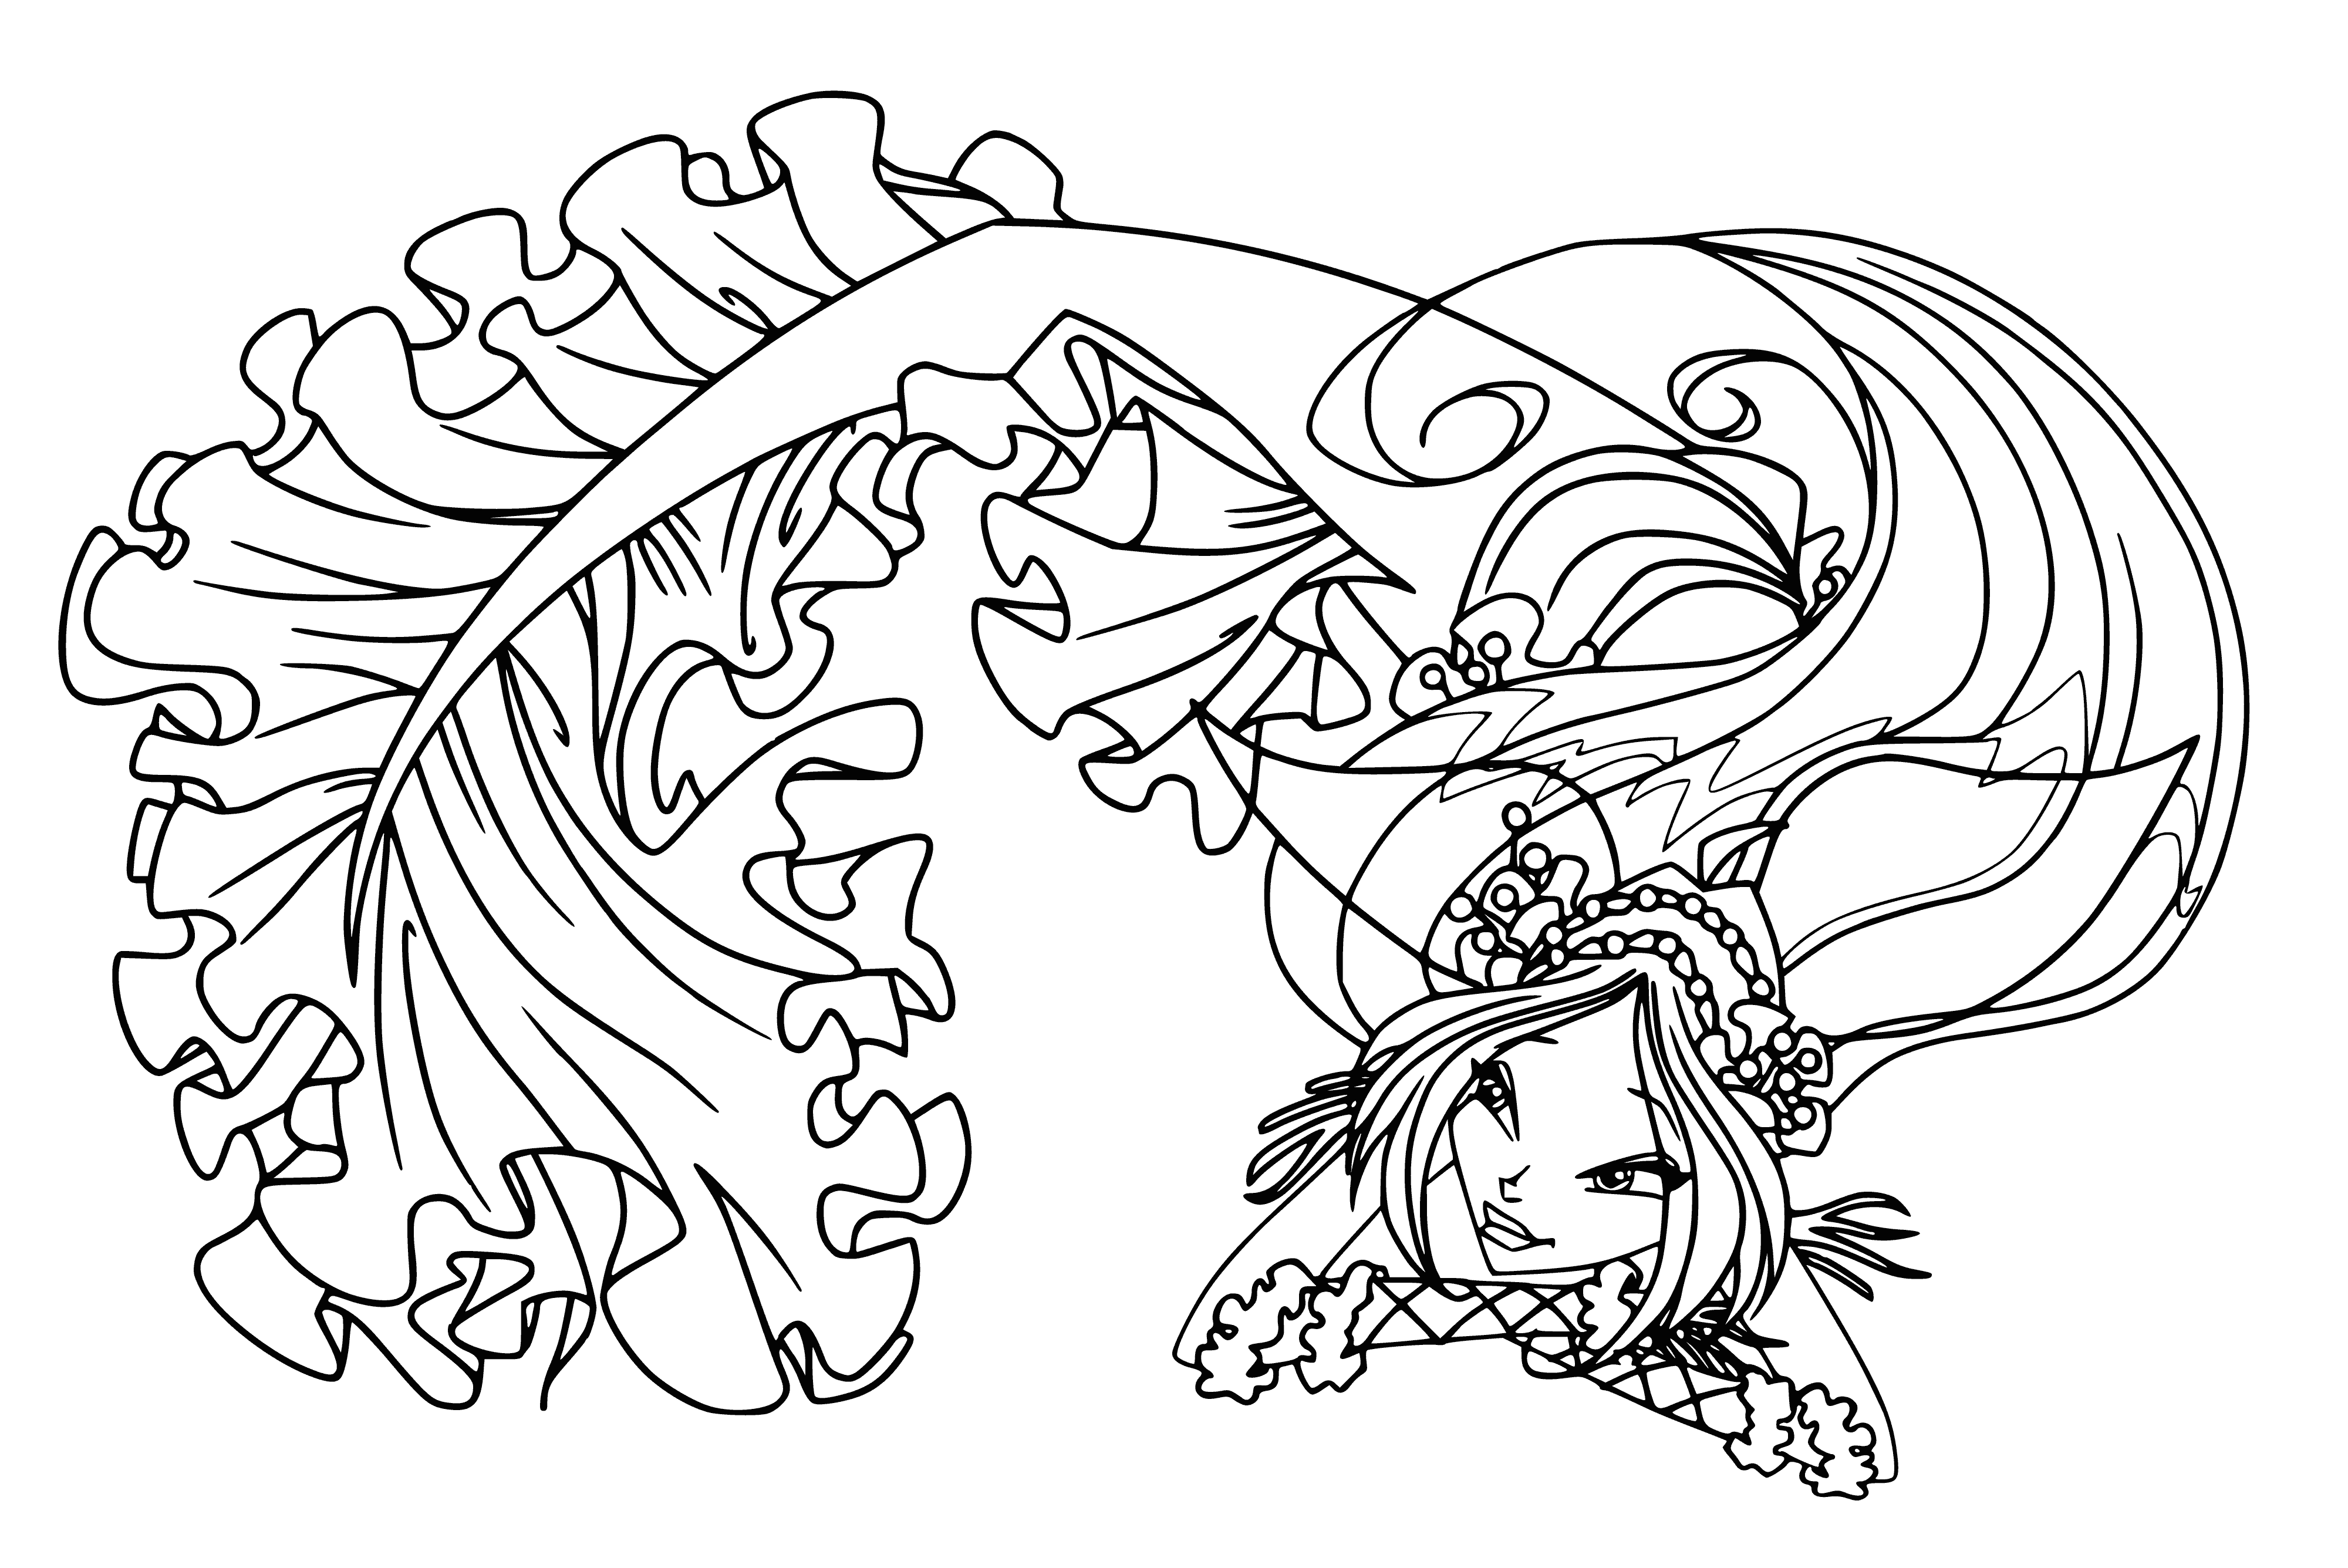 coloring page: The Flora mermaid has long brunette hair, a flower crown, and a green tail with flower patterns.